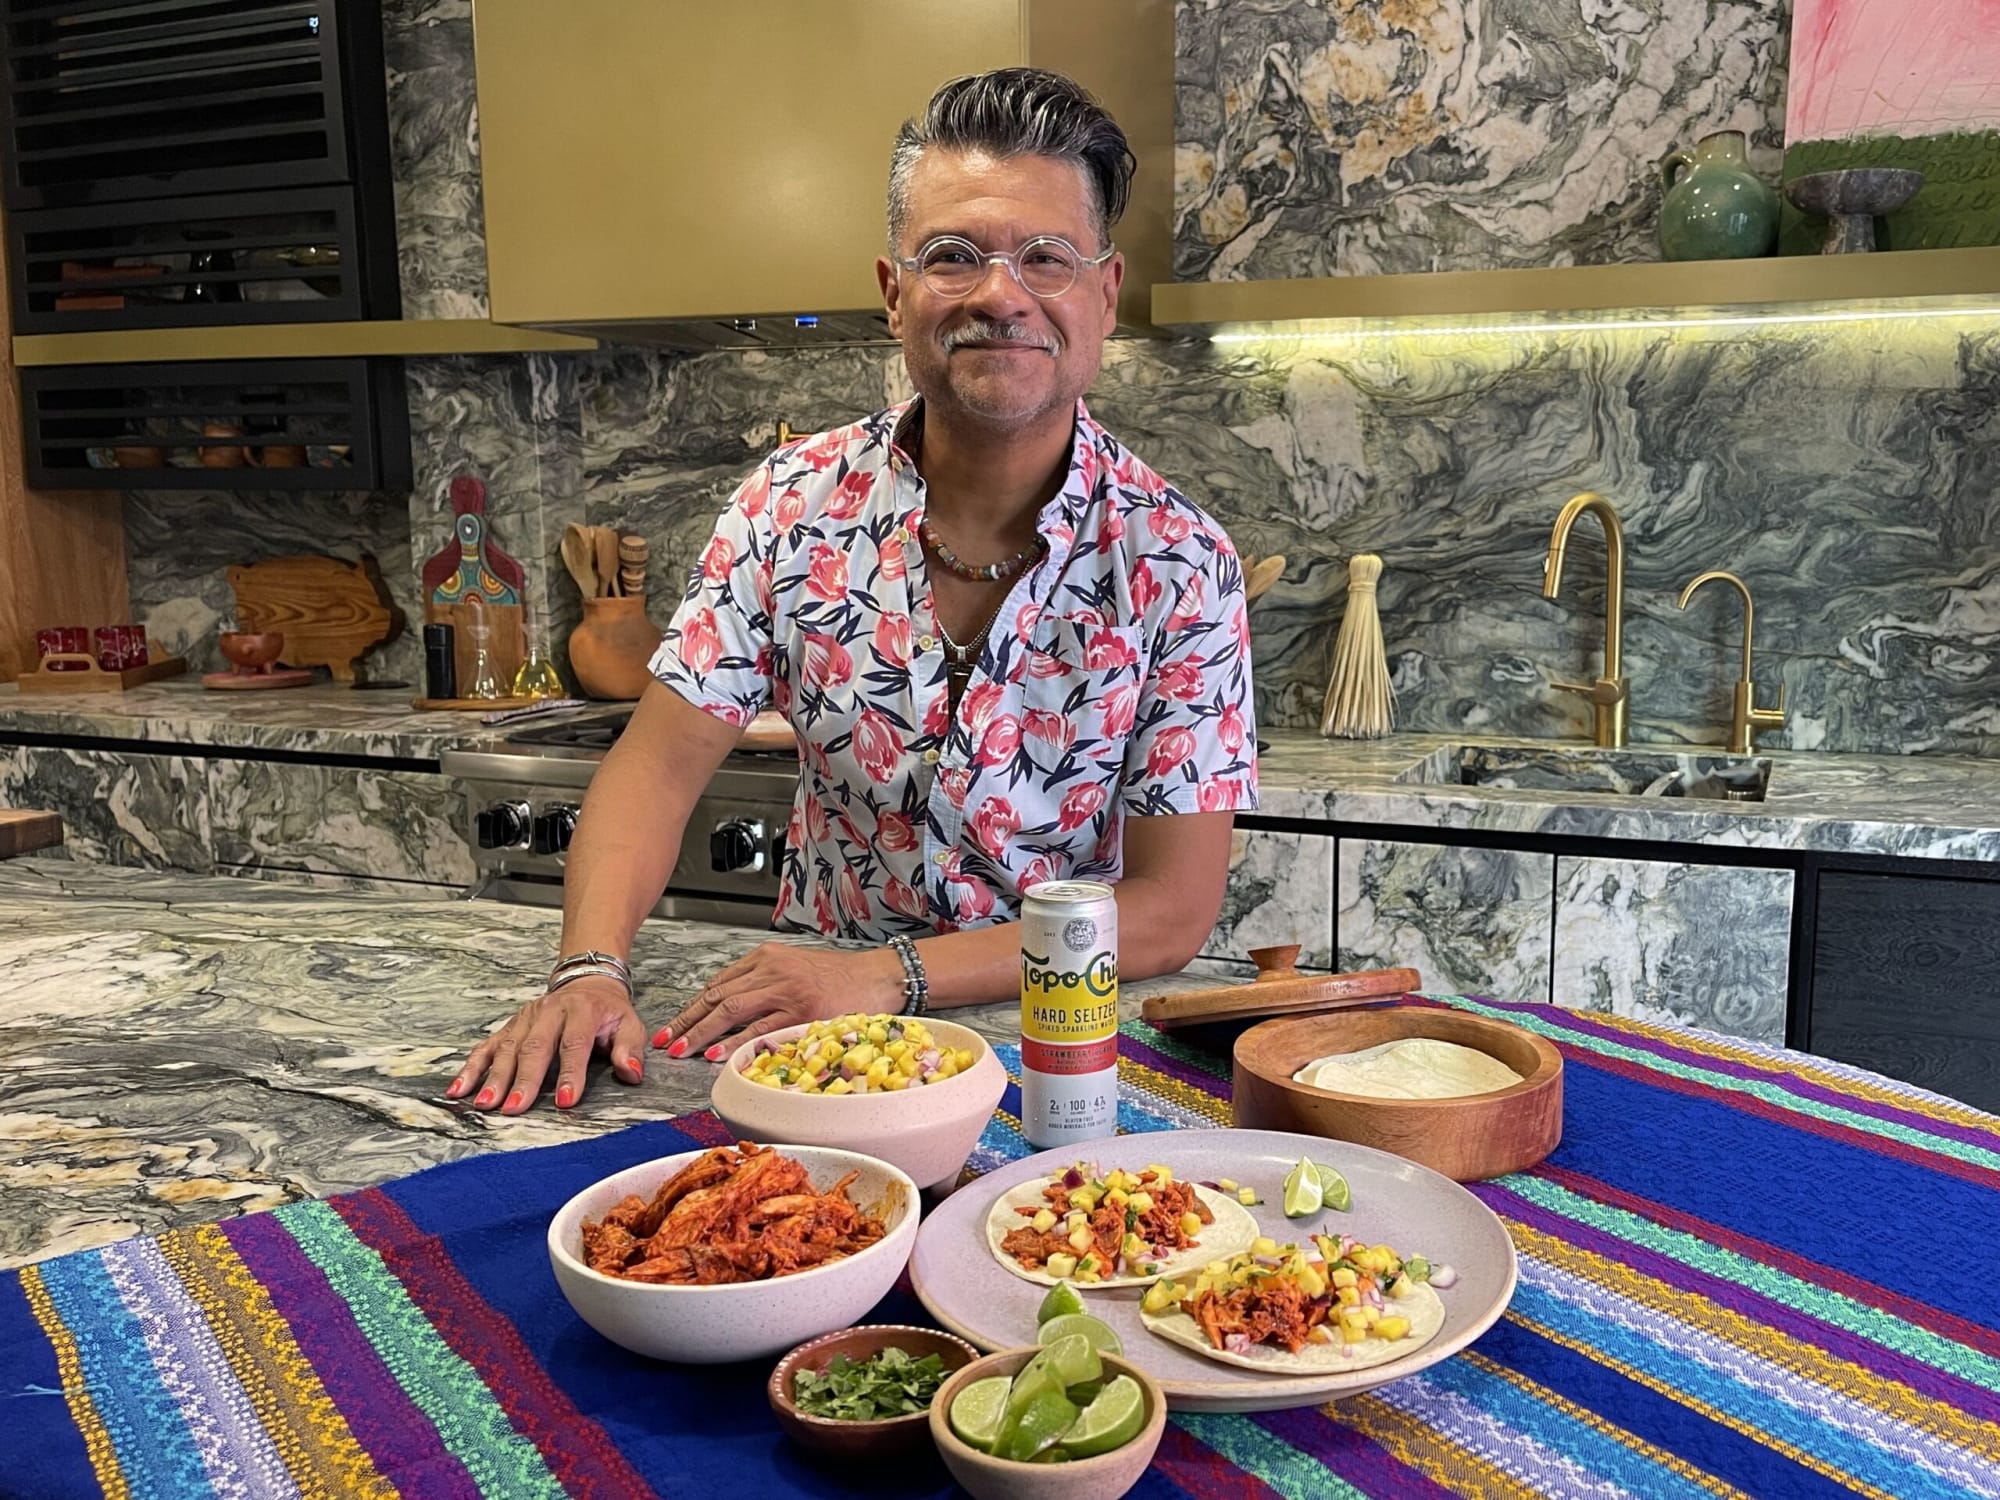 Rick Martinez offers approachable advice on cooking Mexican food, interview